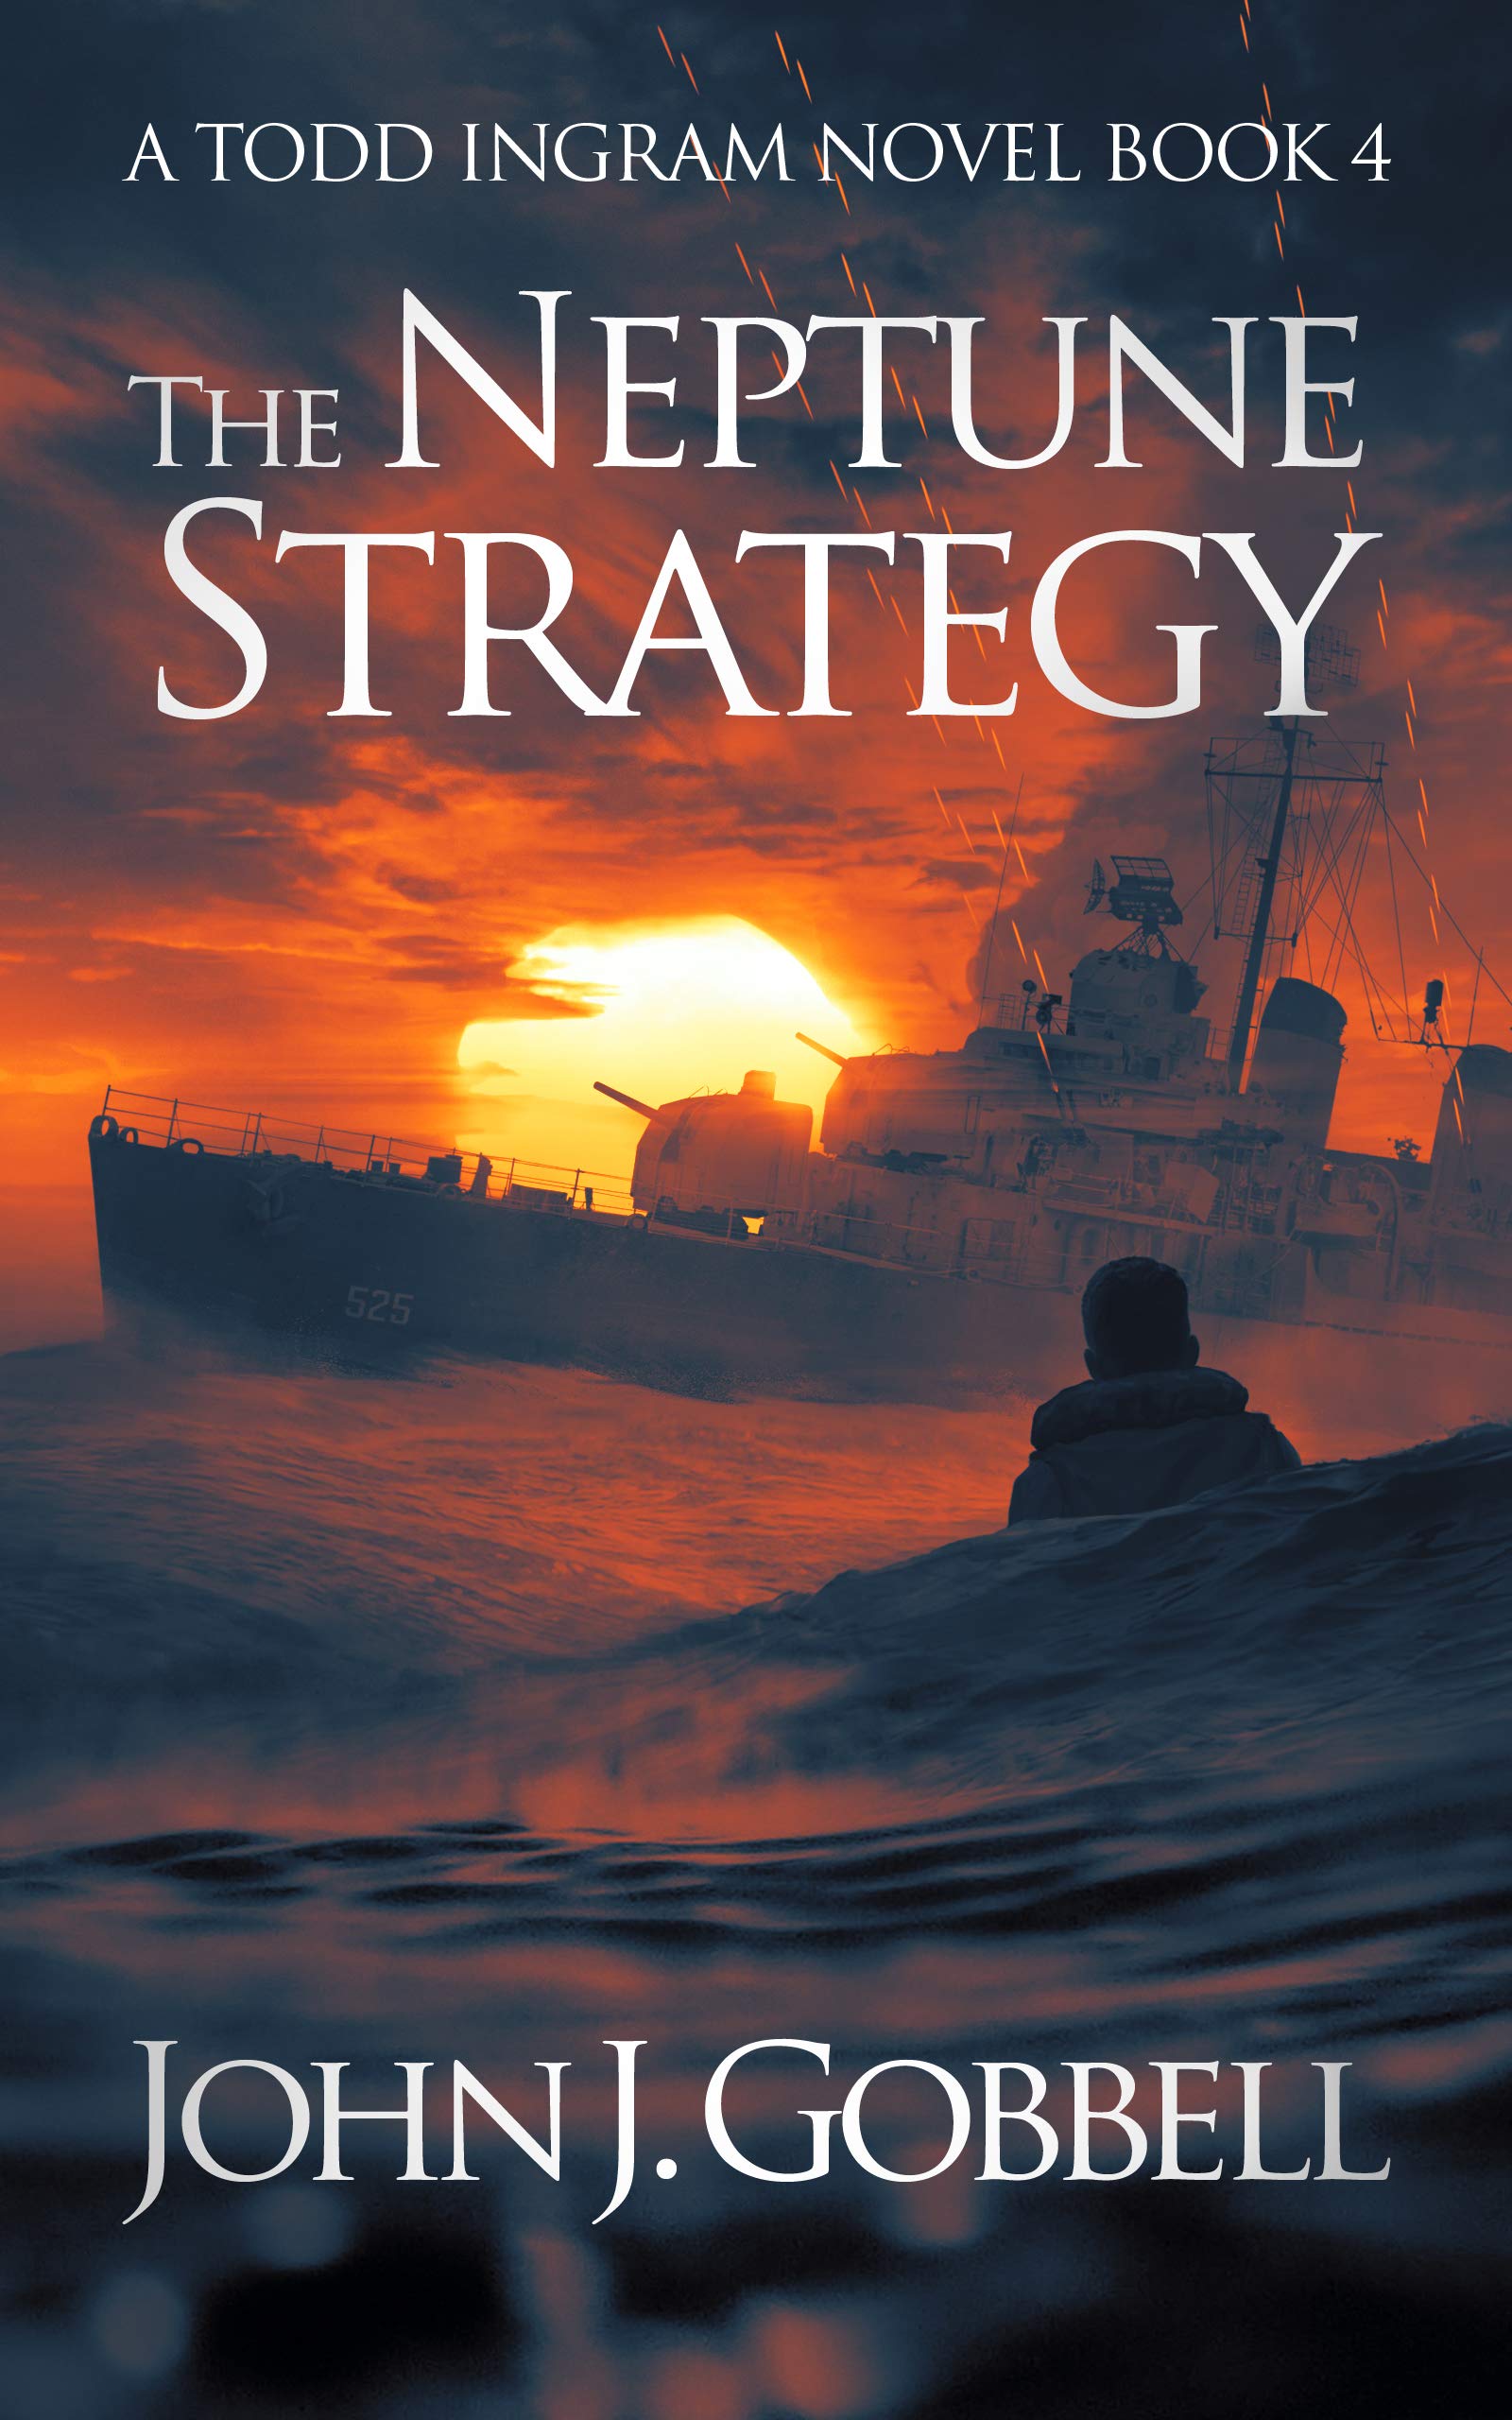 The Neptune Strategy (The Todd Ingram Series Book 4)